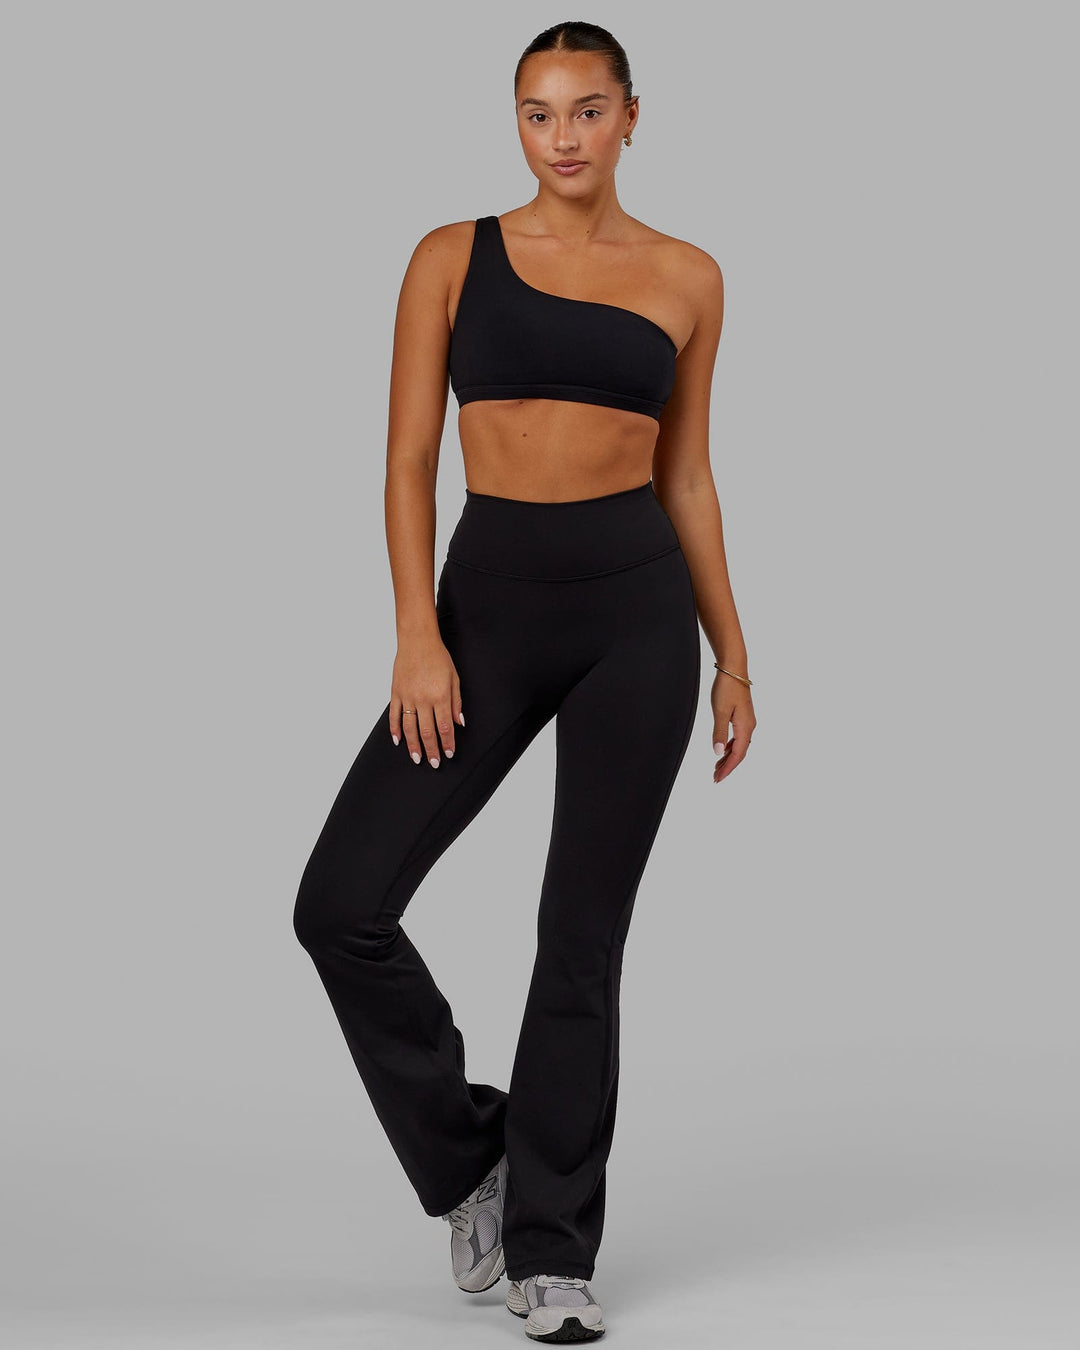 Our Guide to Styling Flared Leggings – LSKD